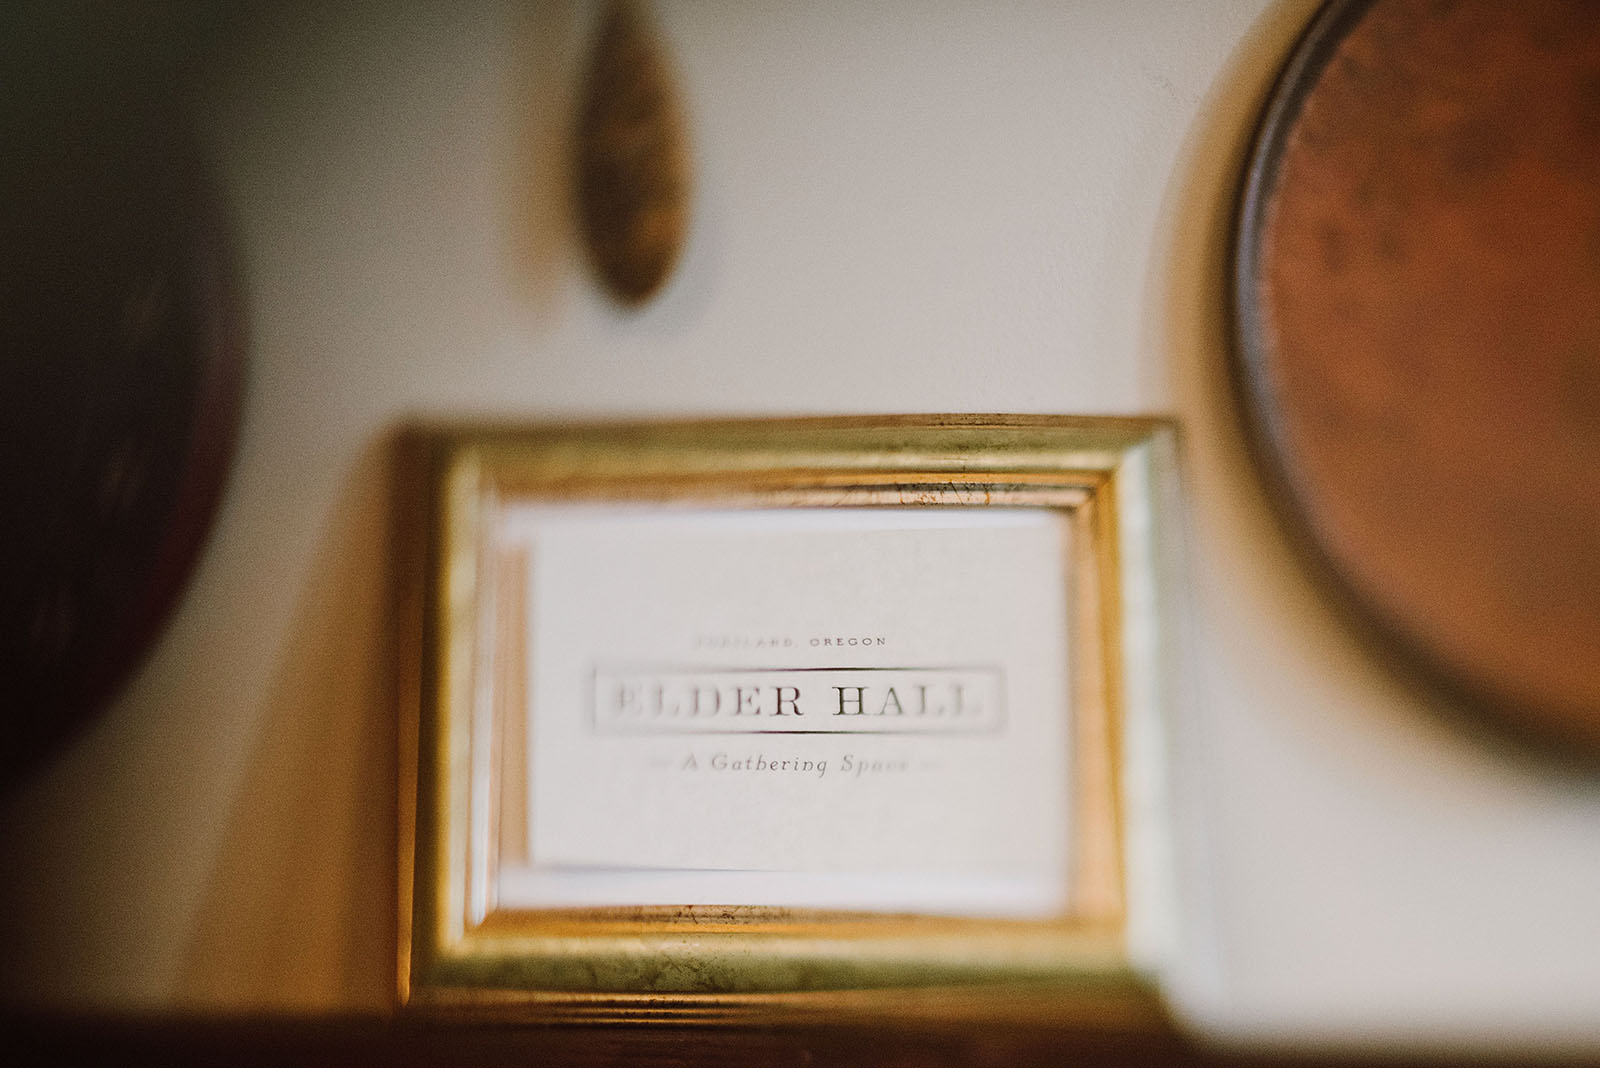 Elder Hall welcome plaque at an intimate Ned Ludd wedding